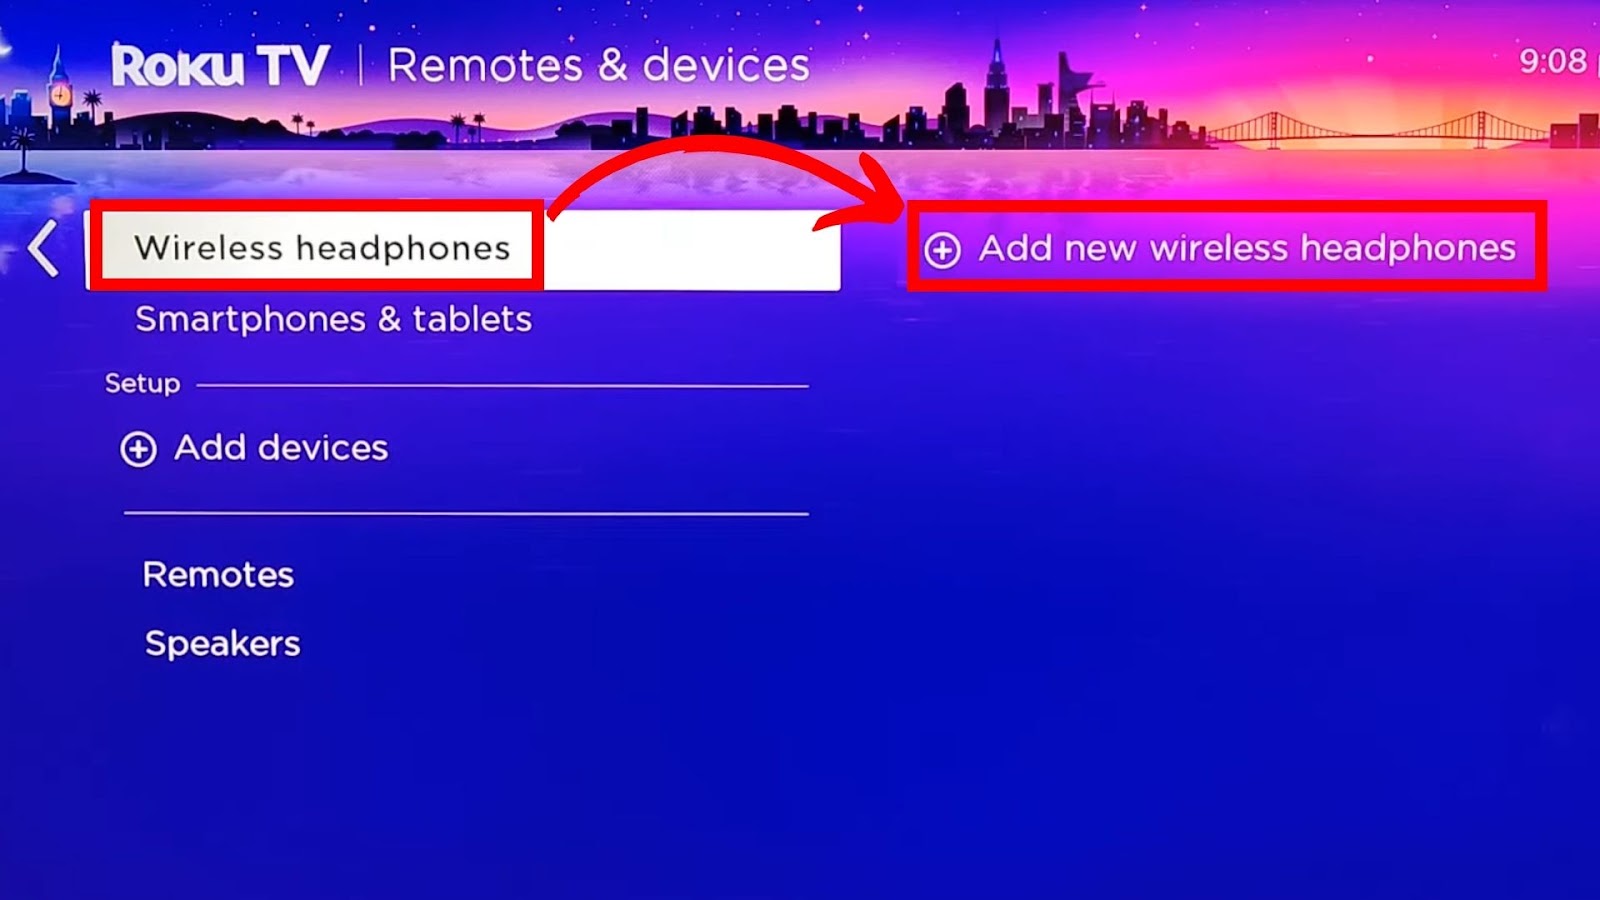 How to Add New Bluetooth Device on Roku TV